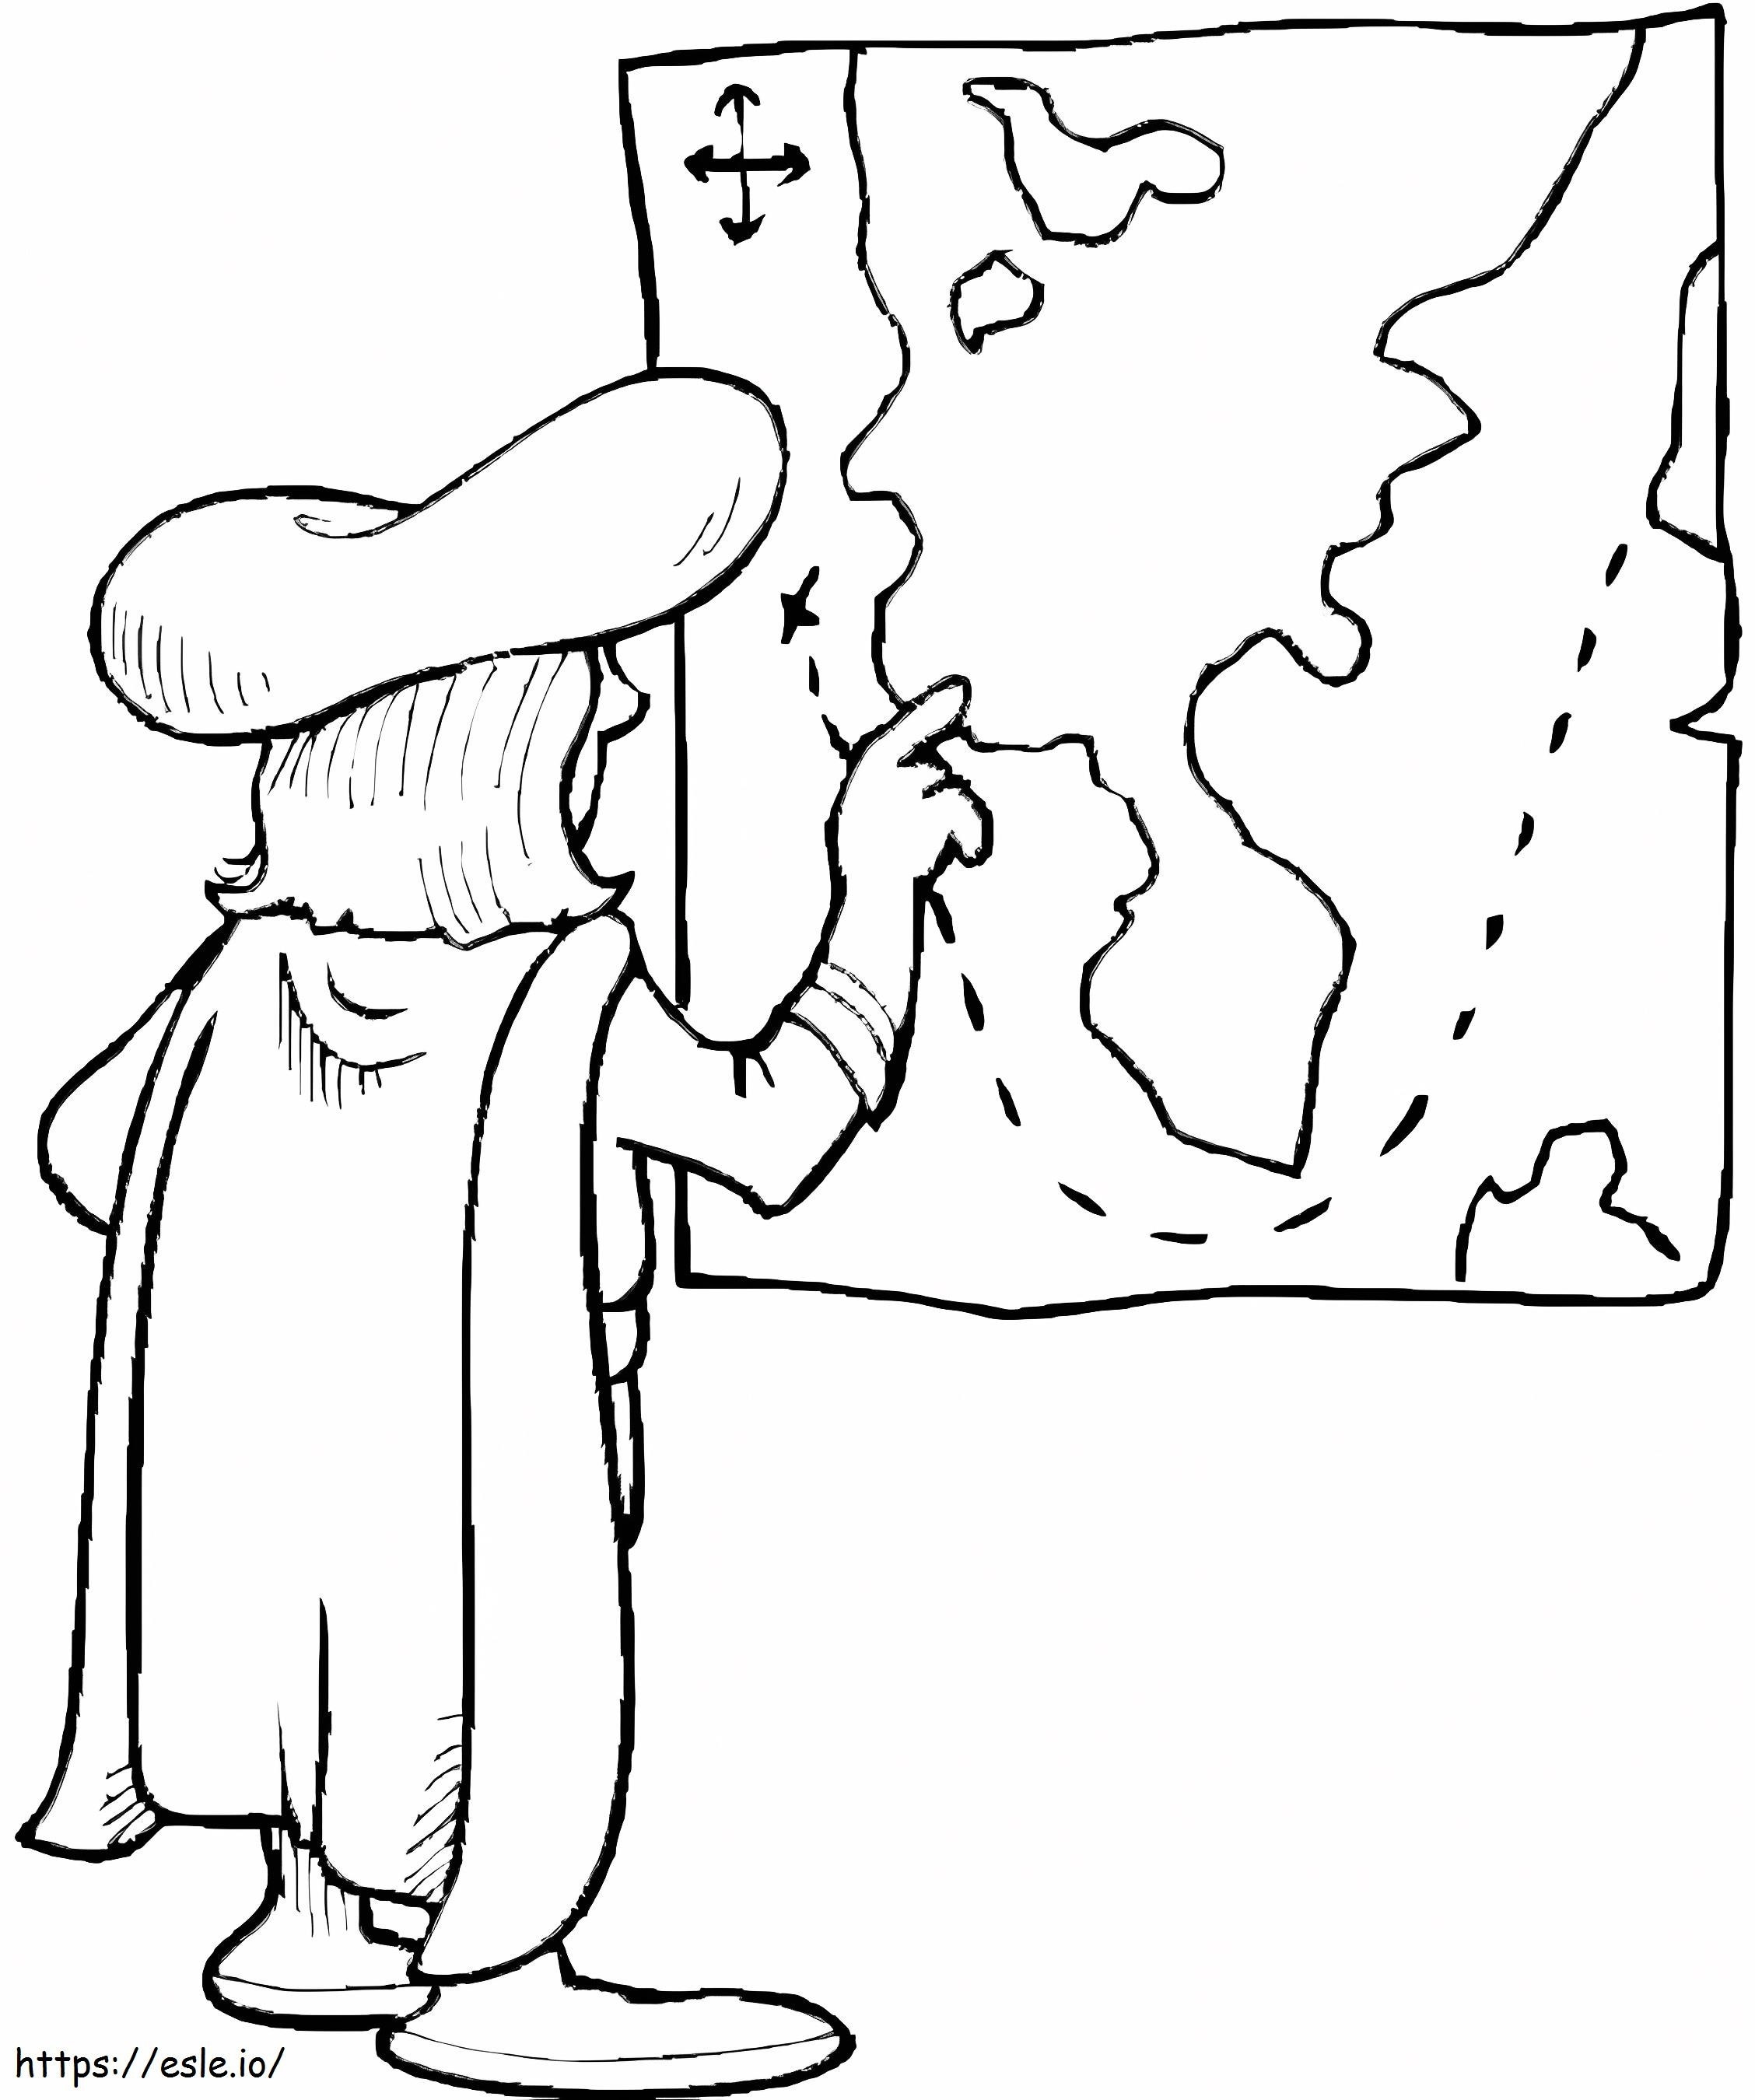 Christopher Columbus 6 coloring page